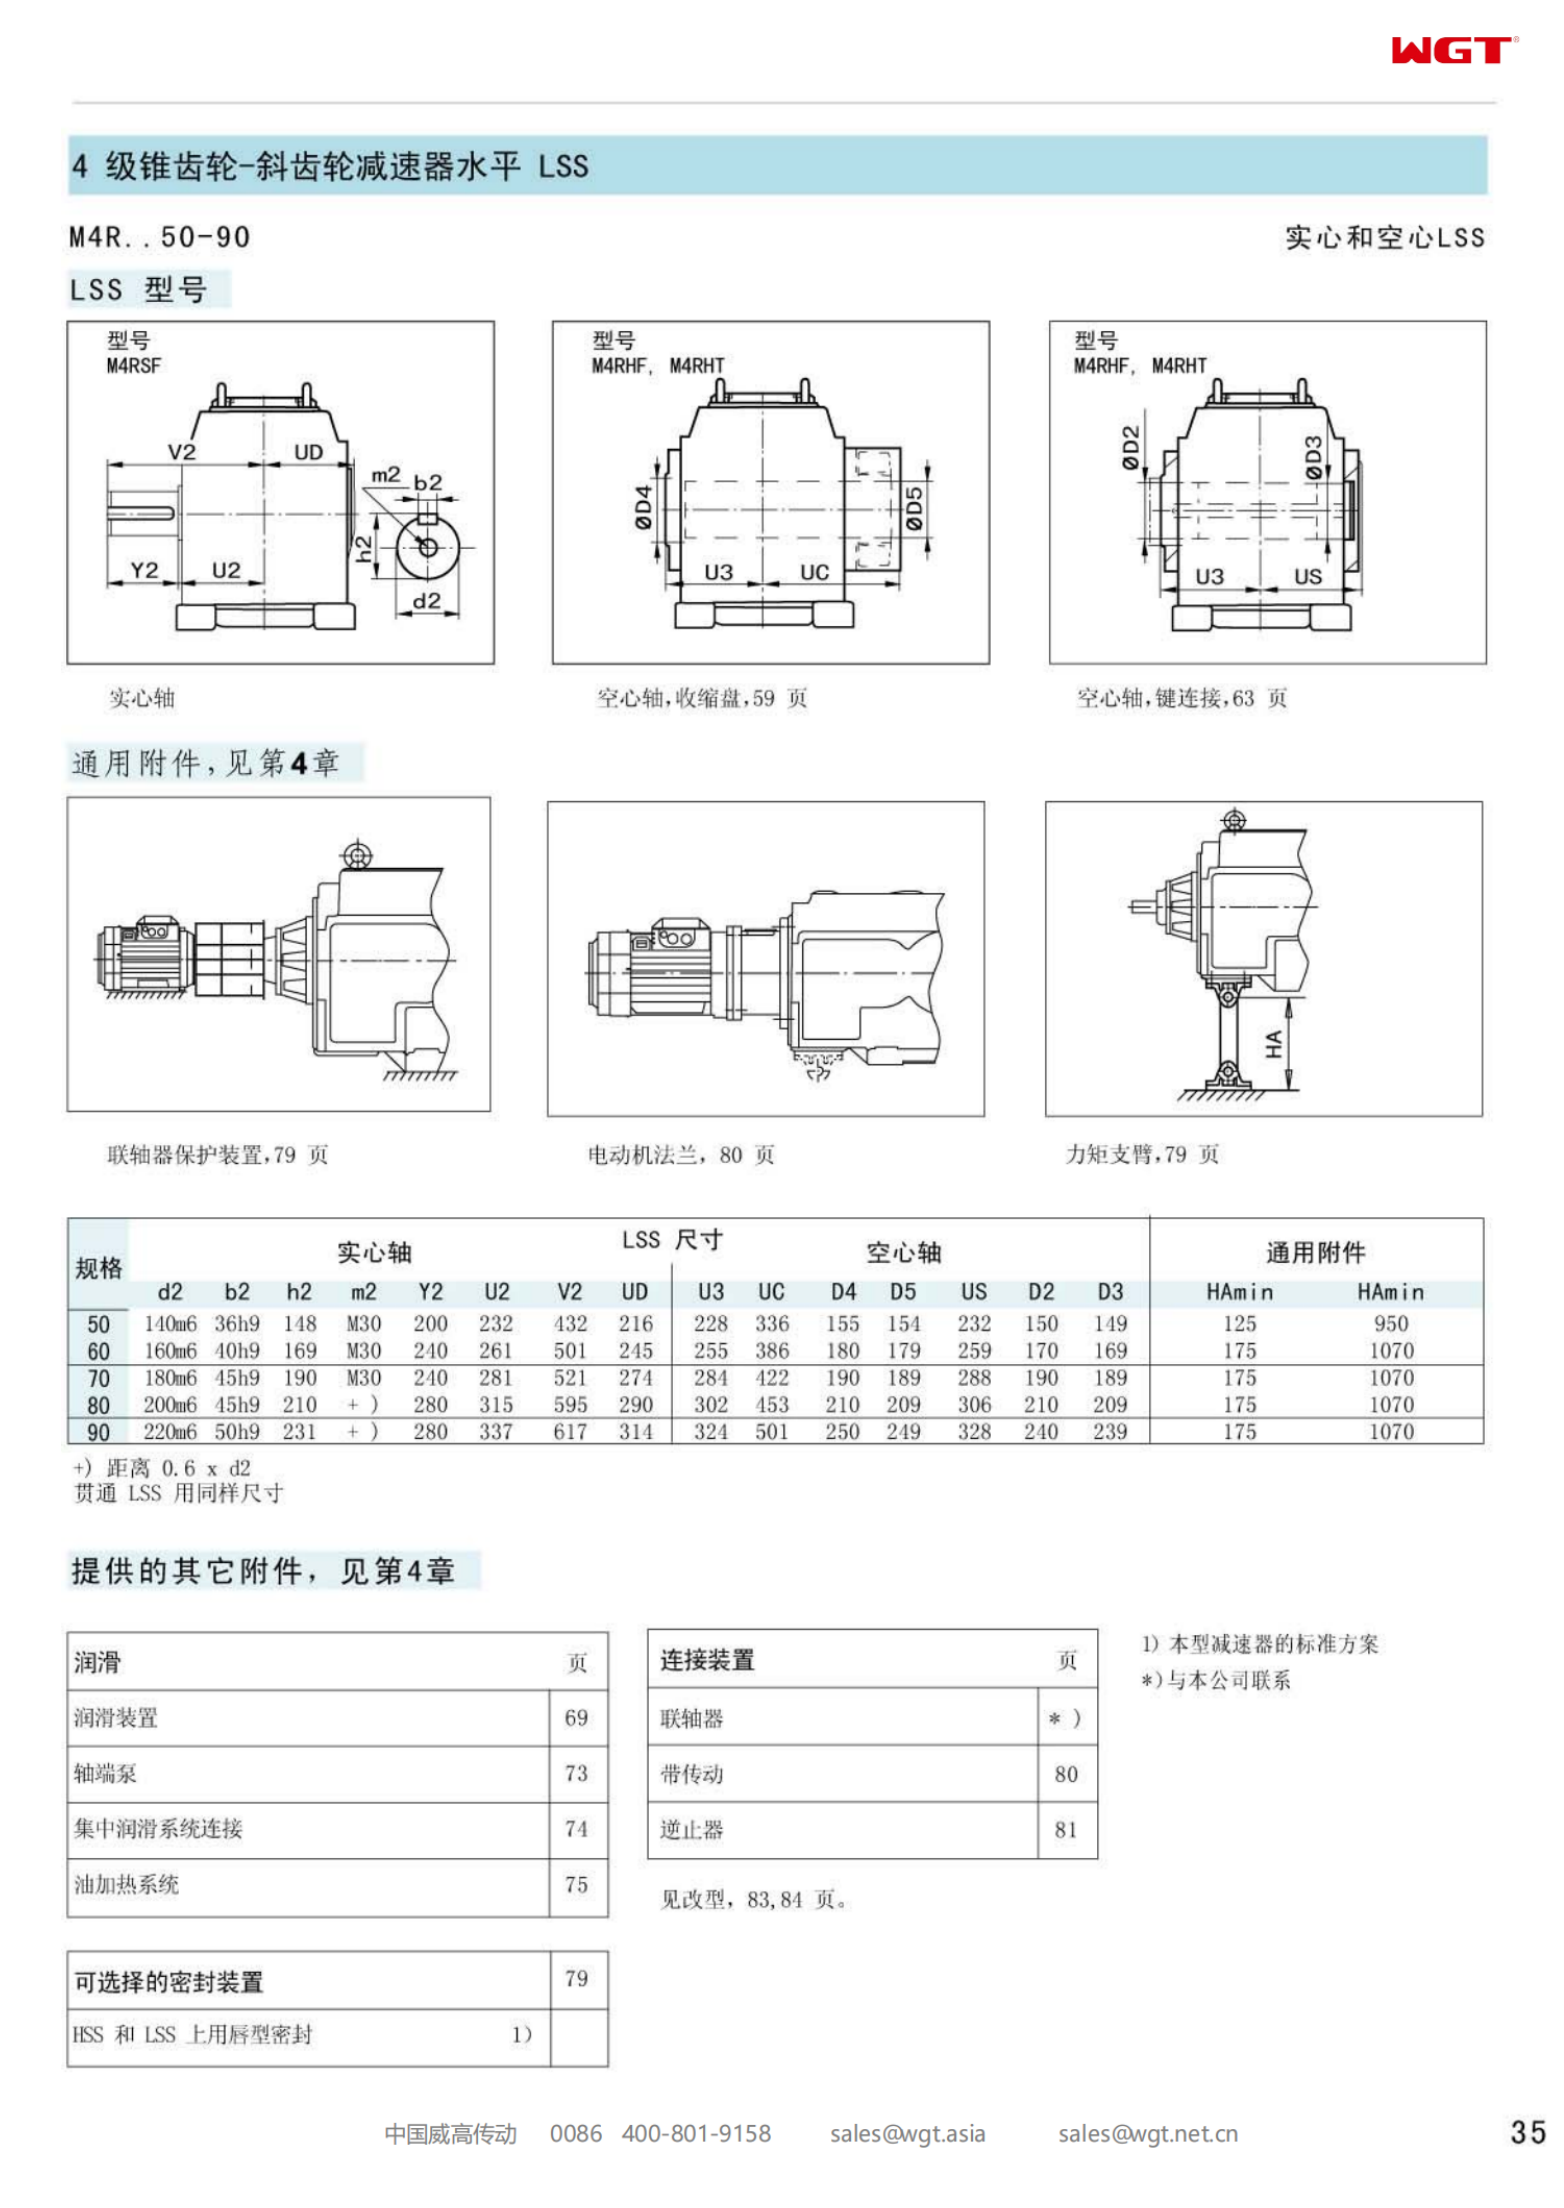 M4RSF60 Replace_SEW_M_Series Gearbox